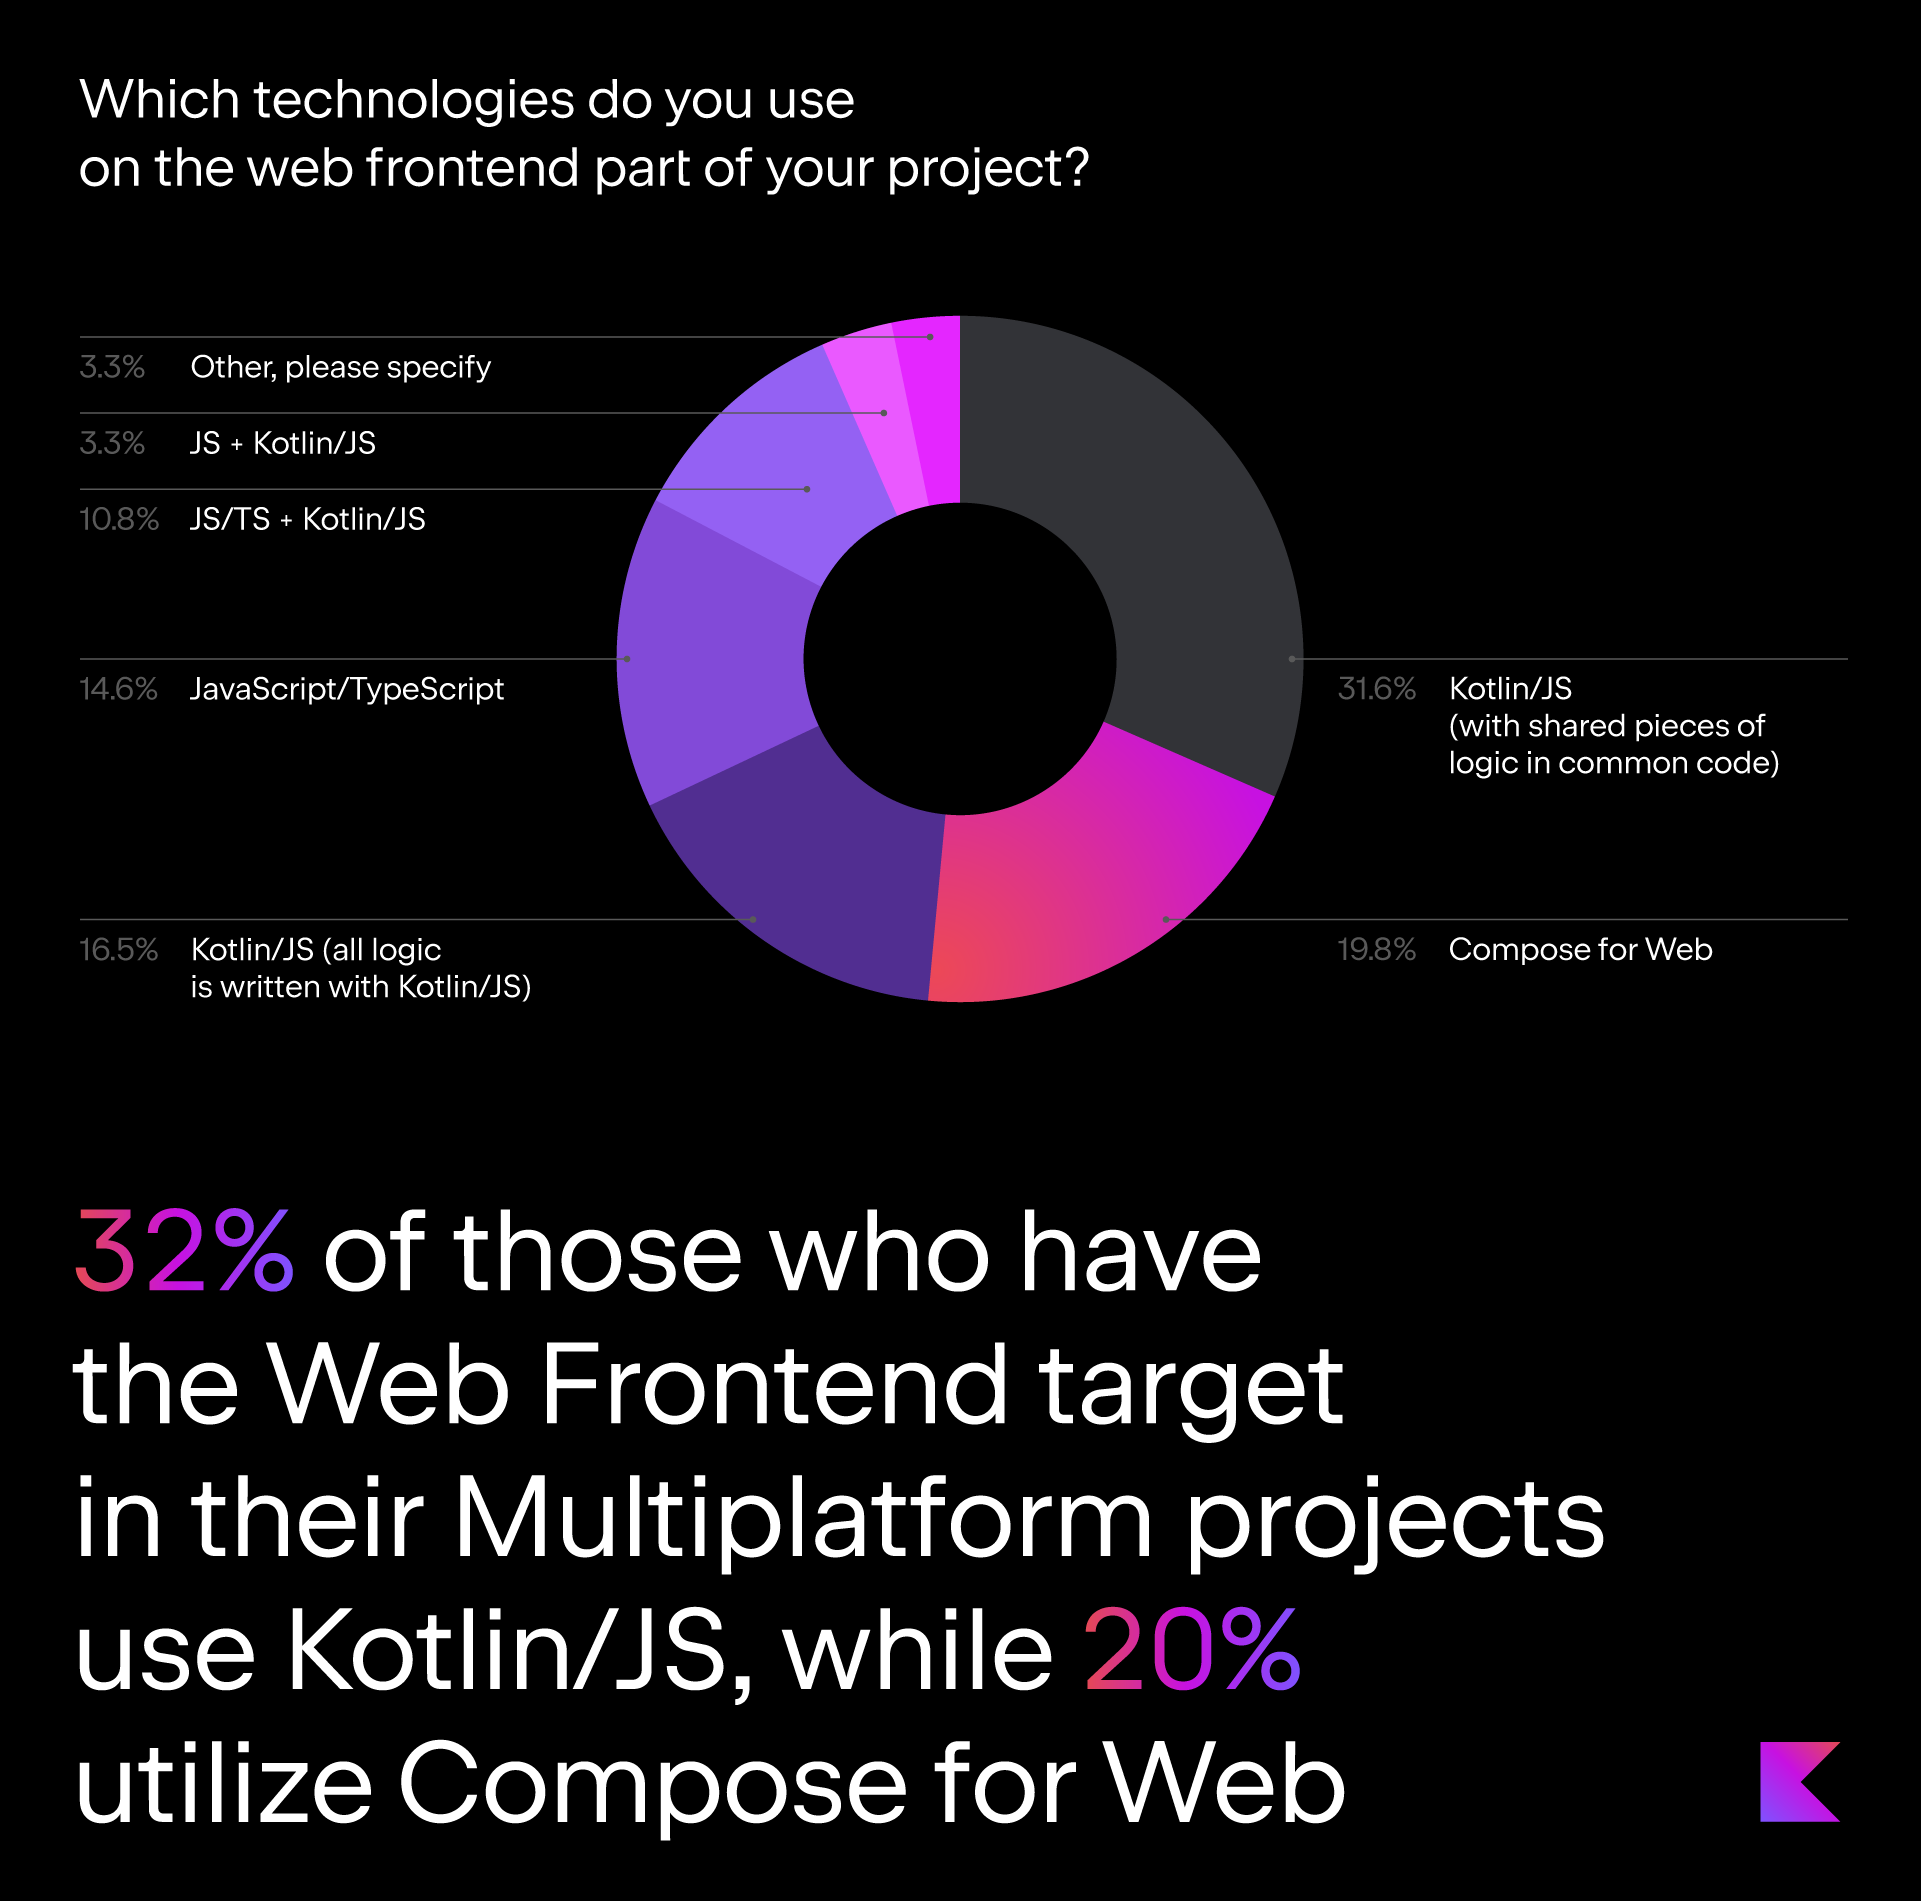 32% of those who have the Web Frontend target in their Multiplatform projects use Kotlin/JS